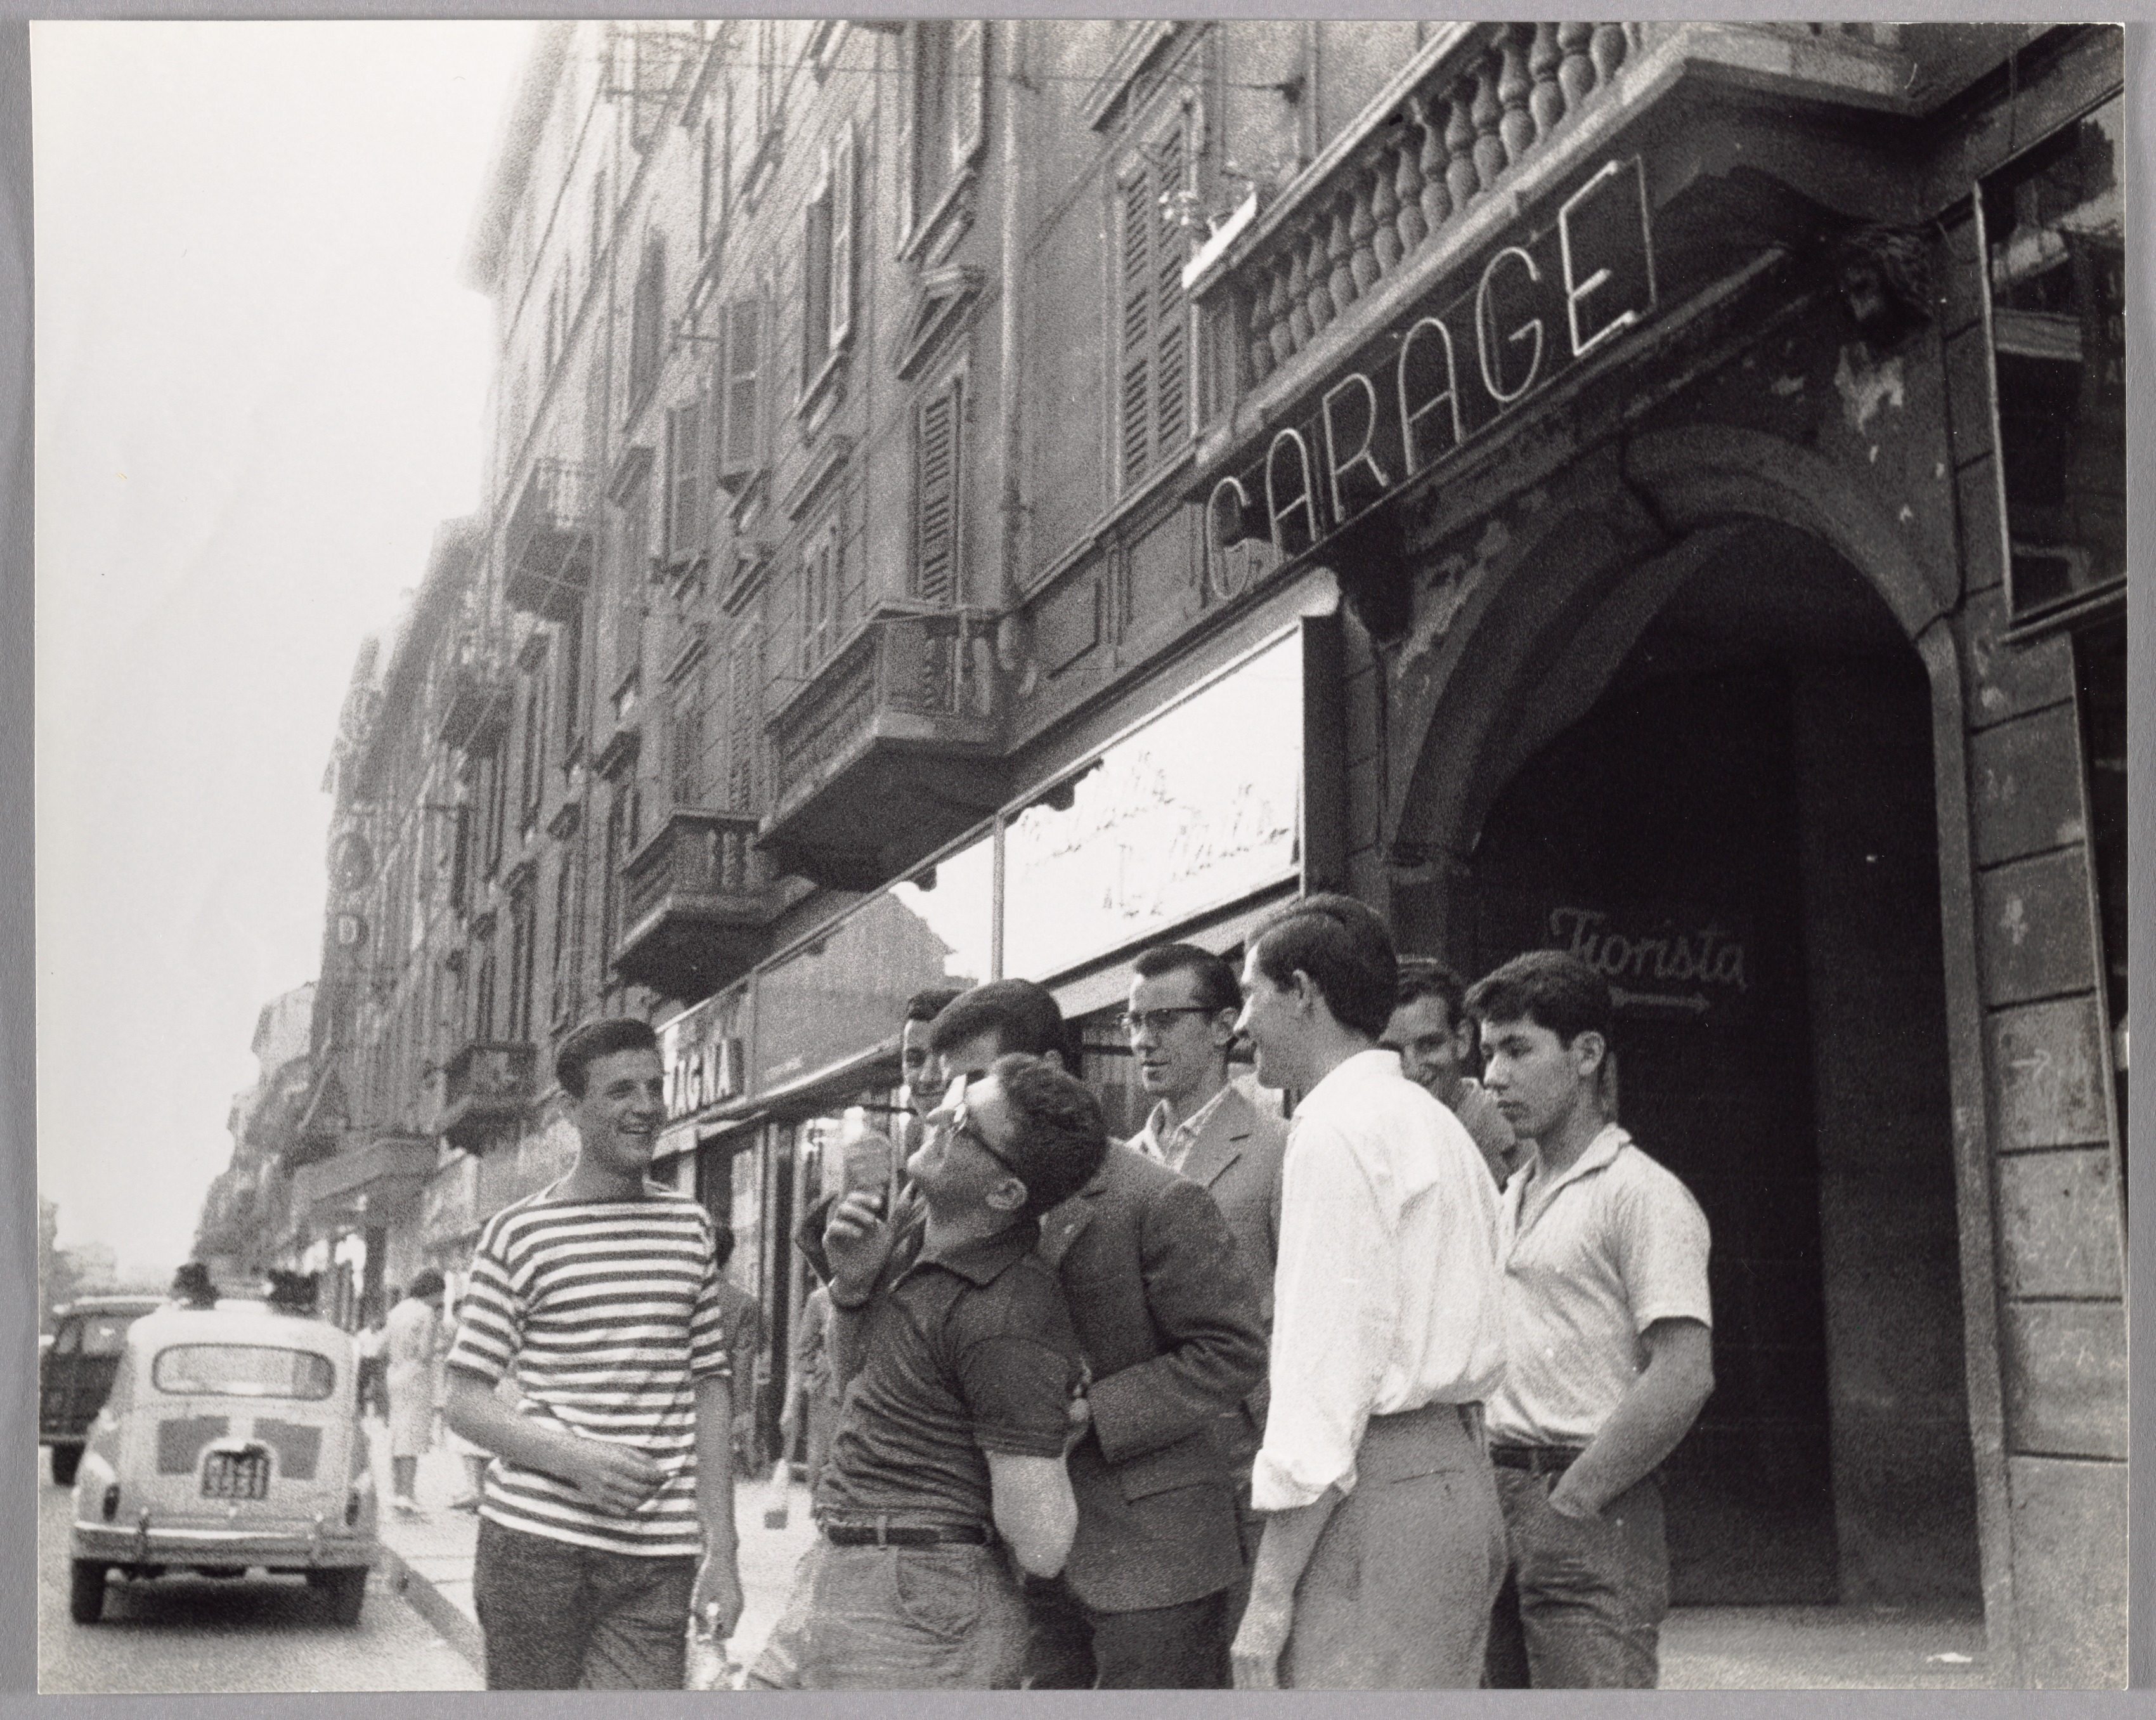 Group of Laughing Young Men on Street, in Front of Neon Garage Sign